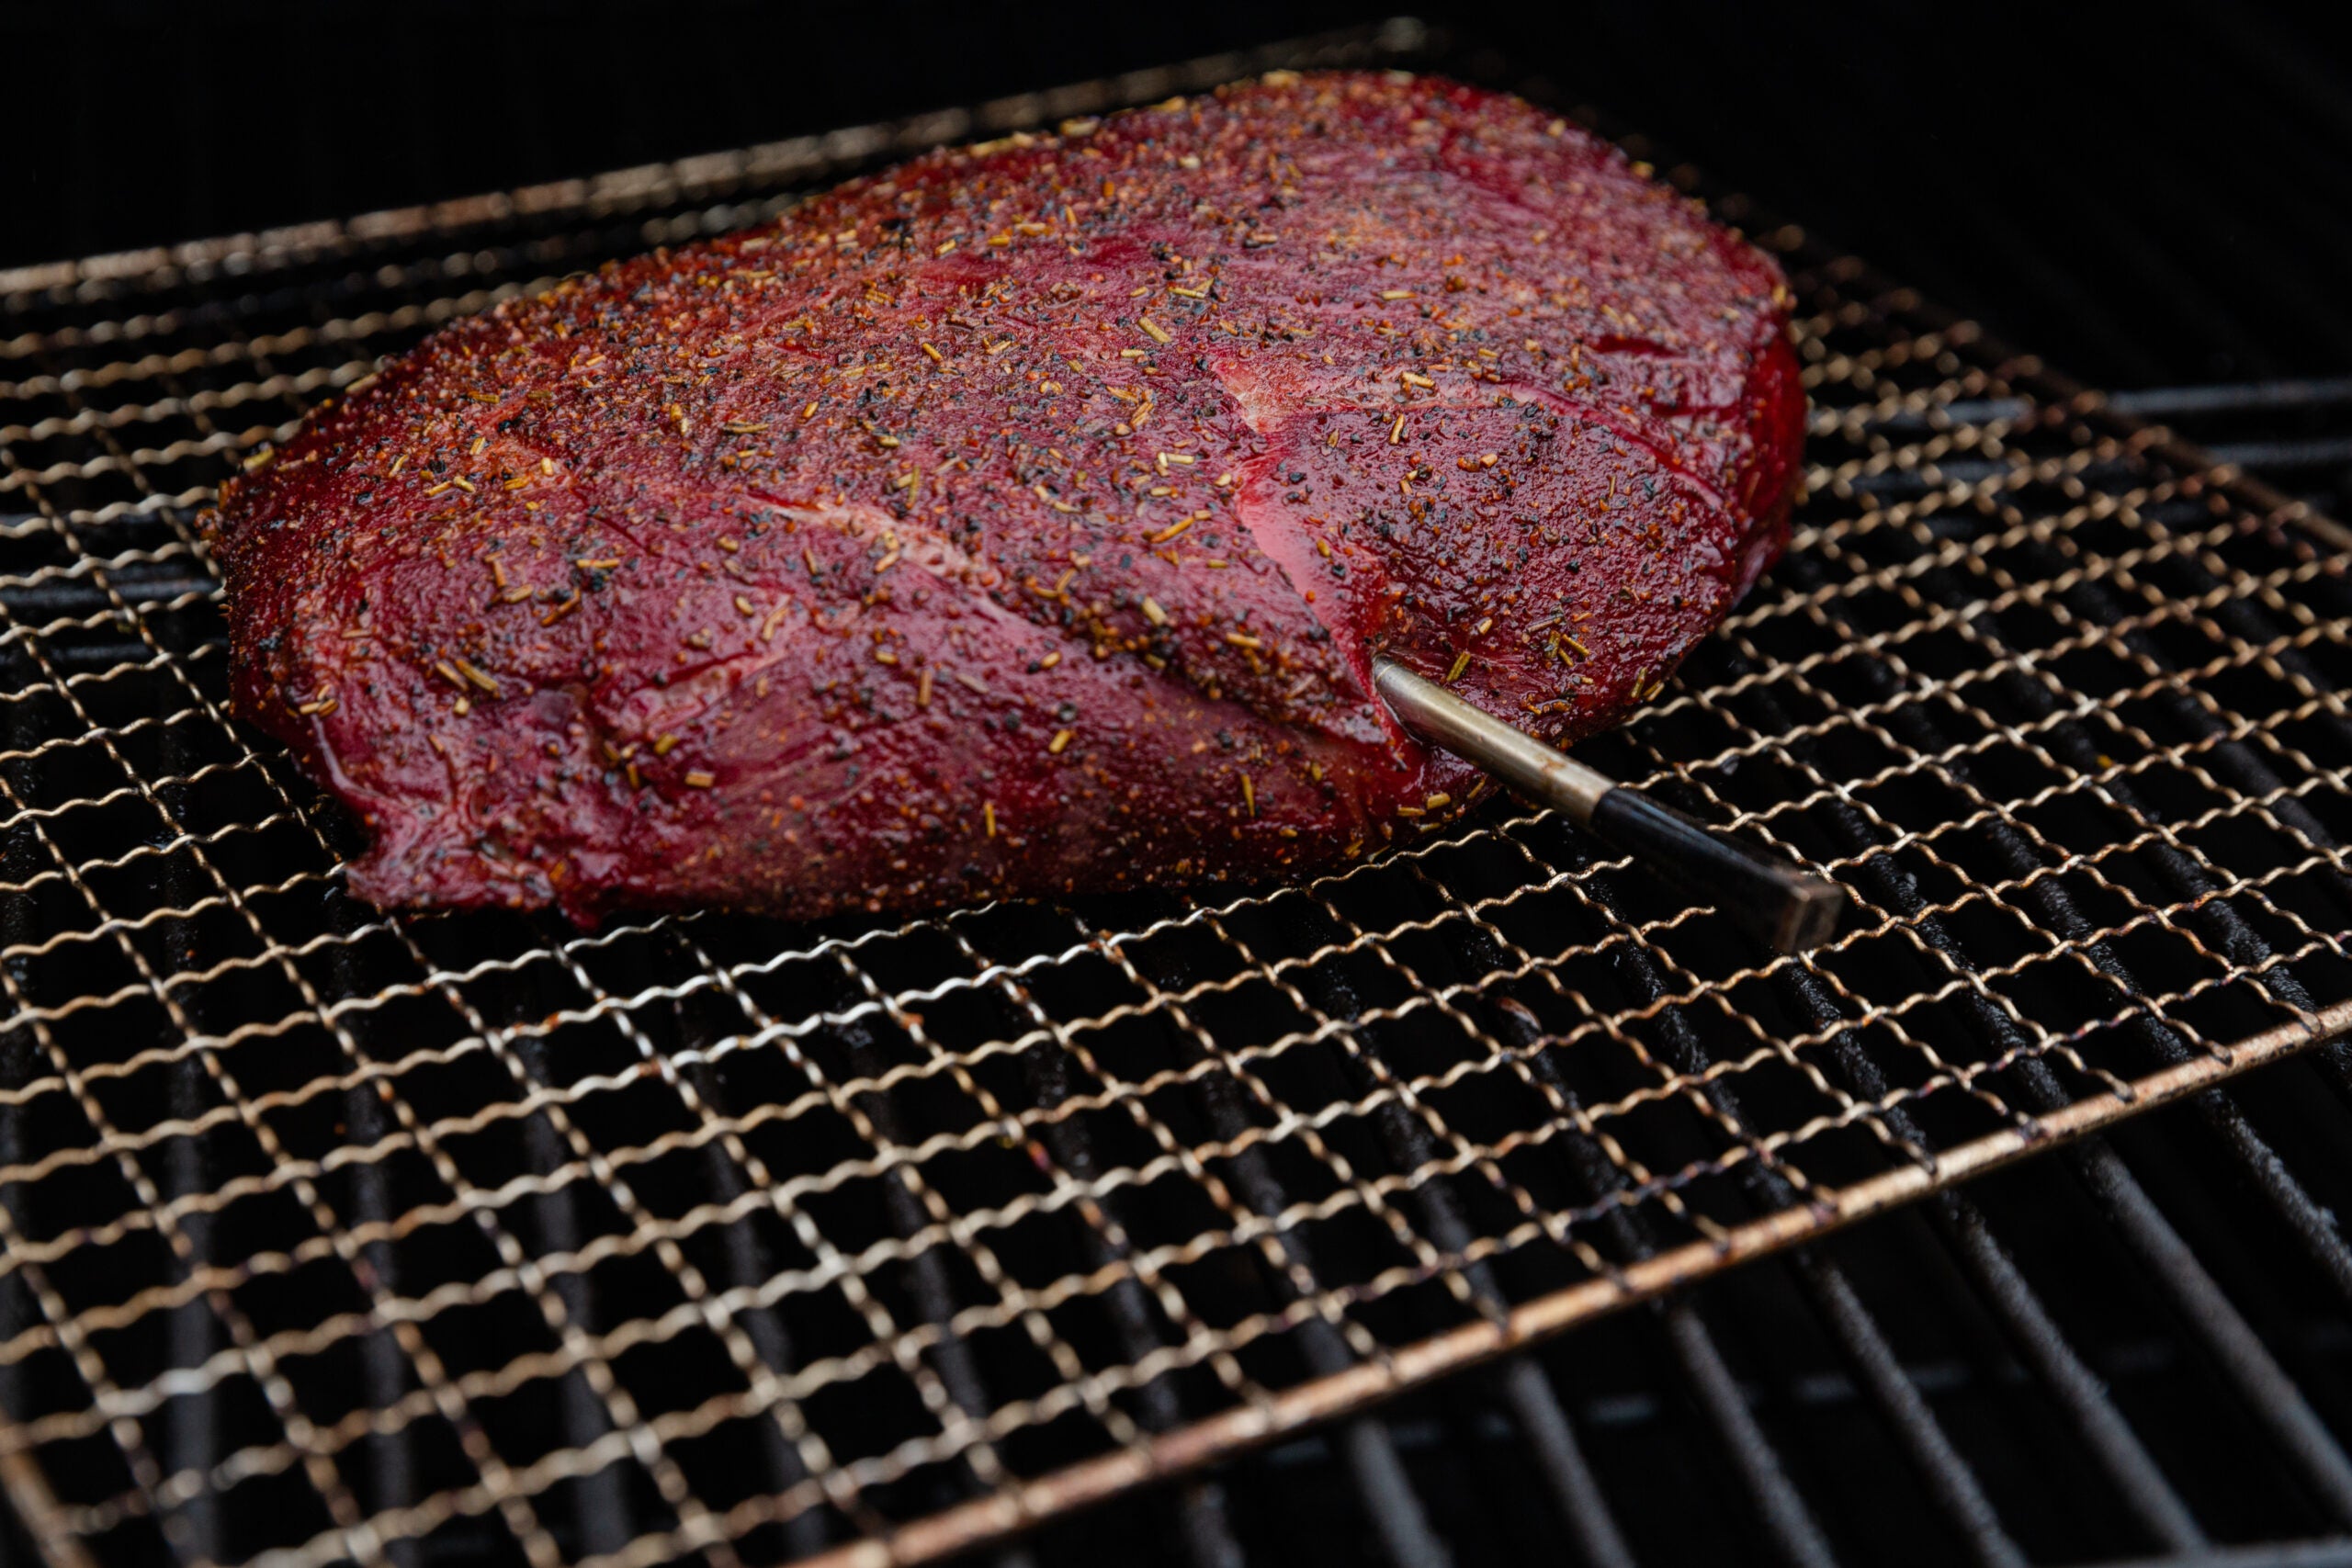 A venison top roast roast cooking in a smoker.